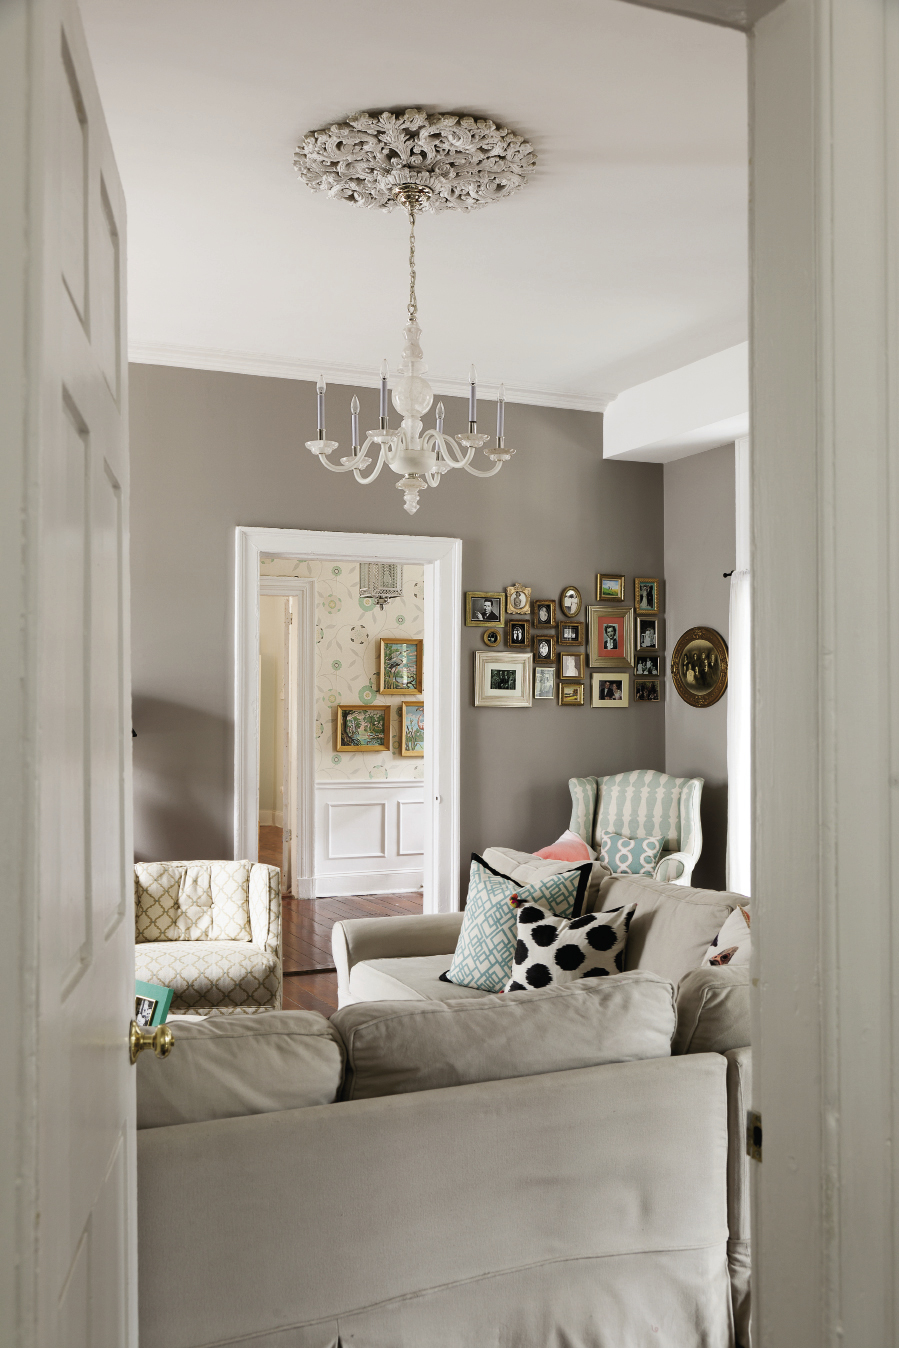 Mixed Mod A cozy mix of a neutral palette, playful patterns, and family-friendly furniture, the Lails’ living room is ideal for all generations, including the ancestors featured in the artful framed collage.